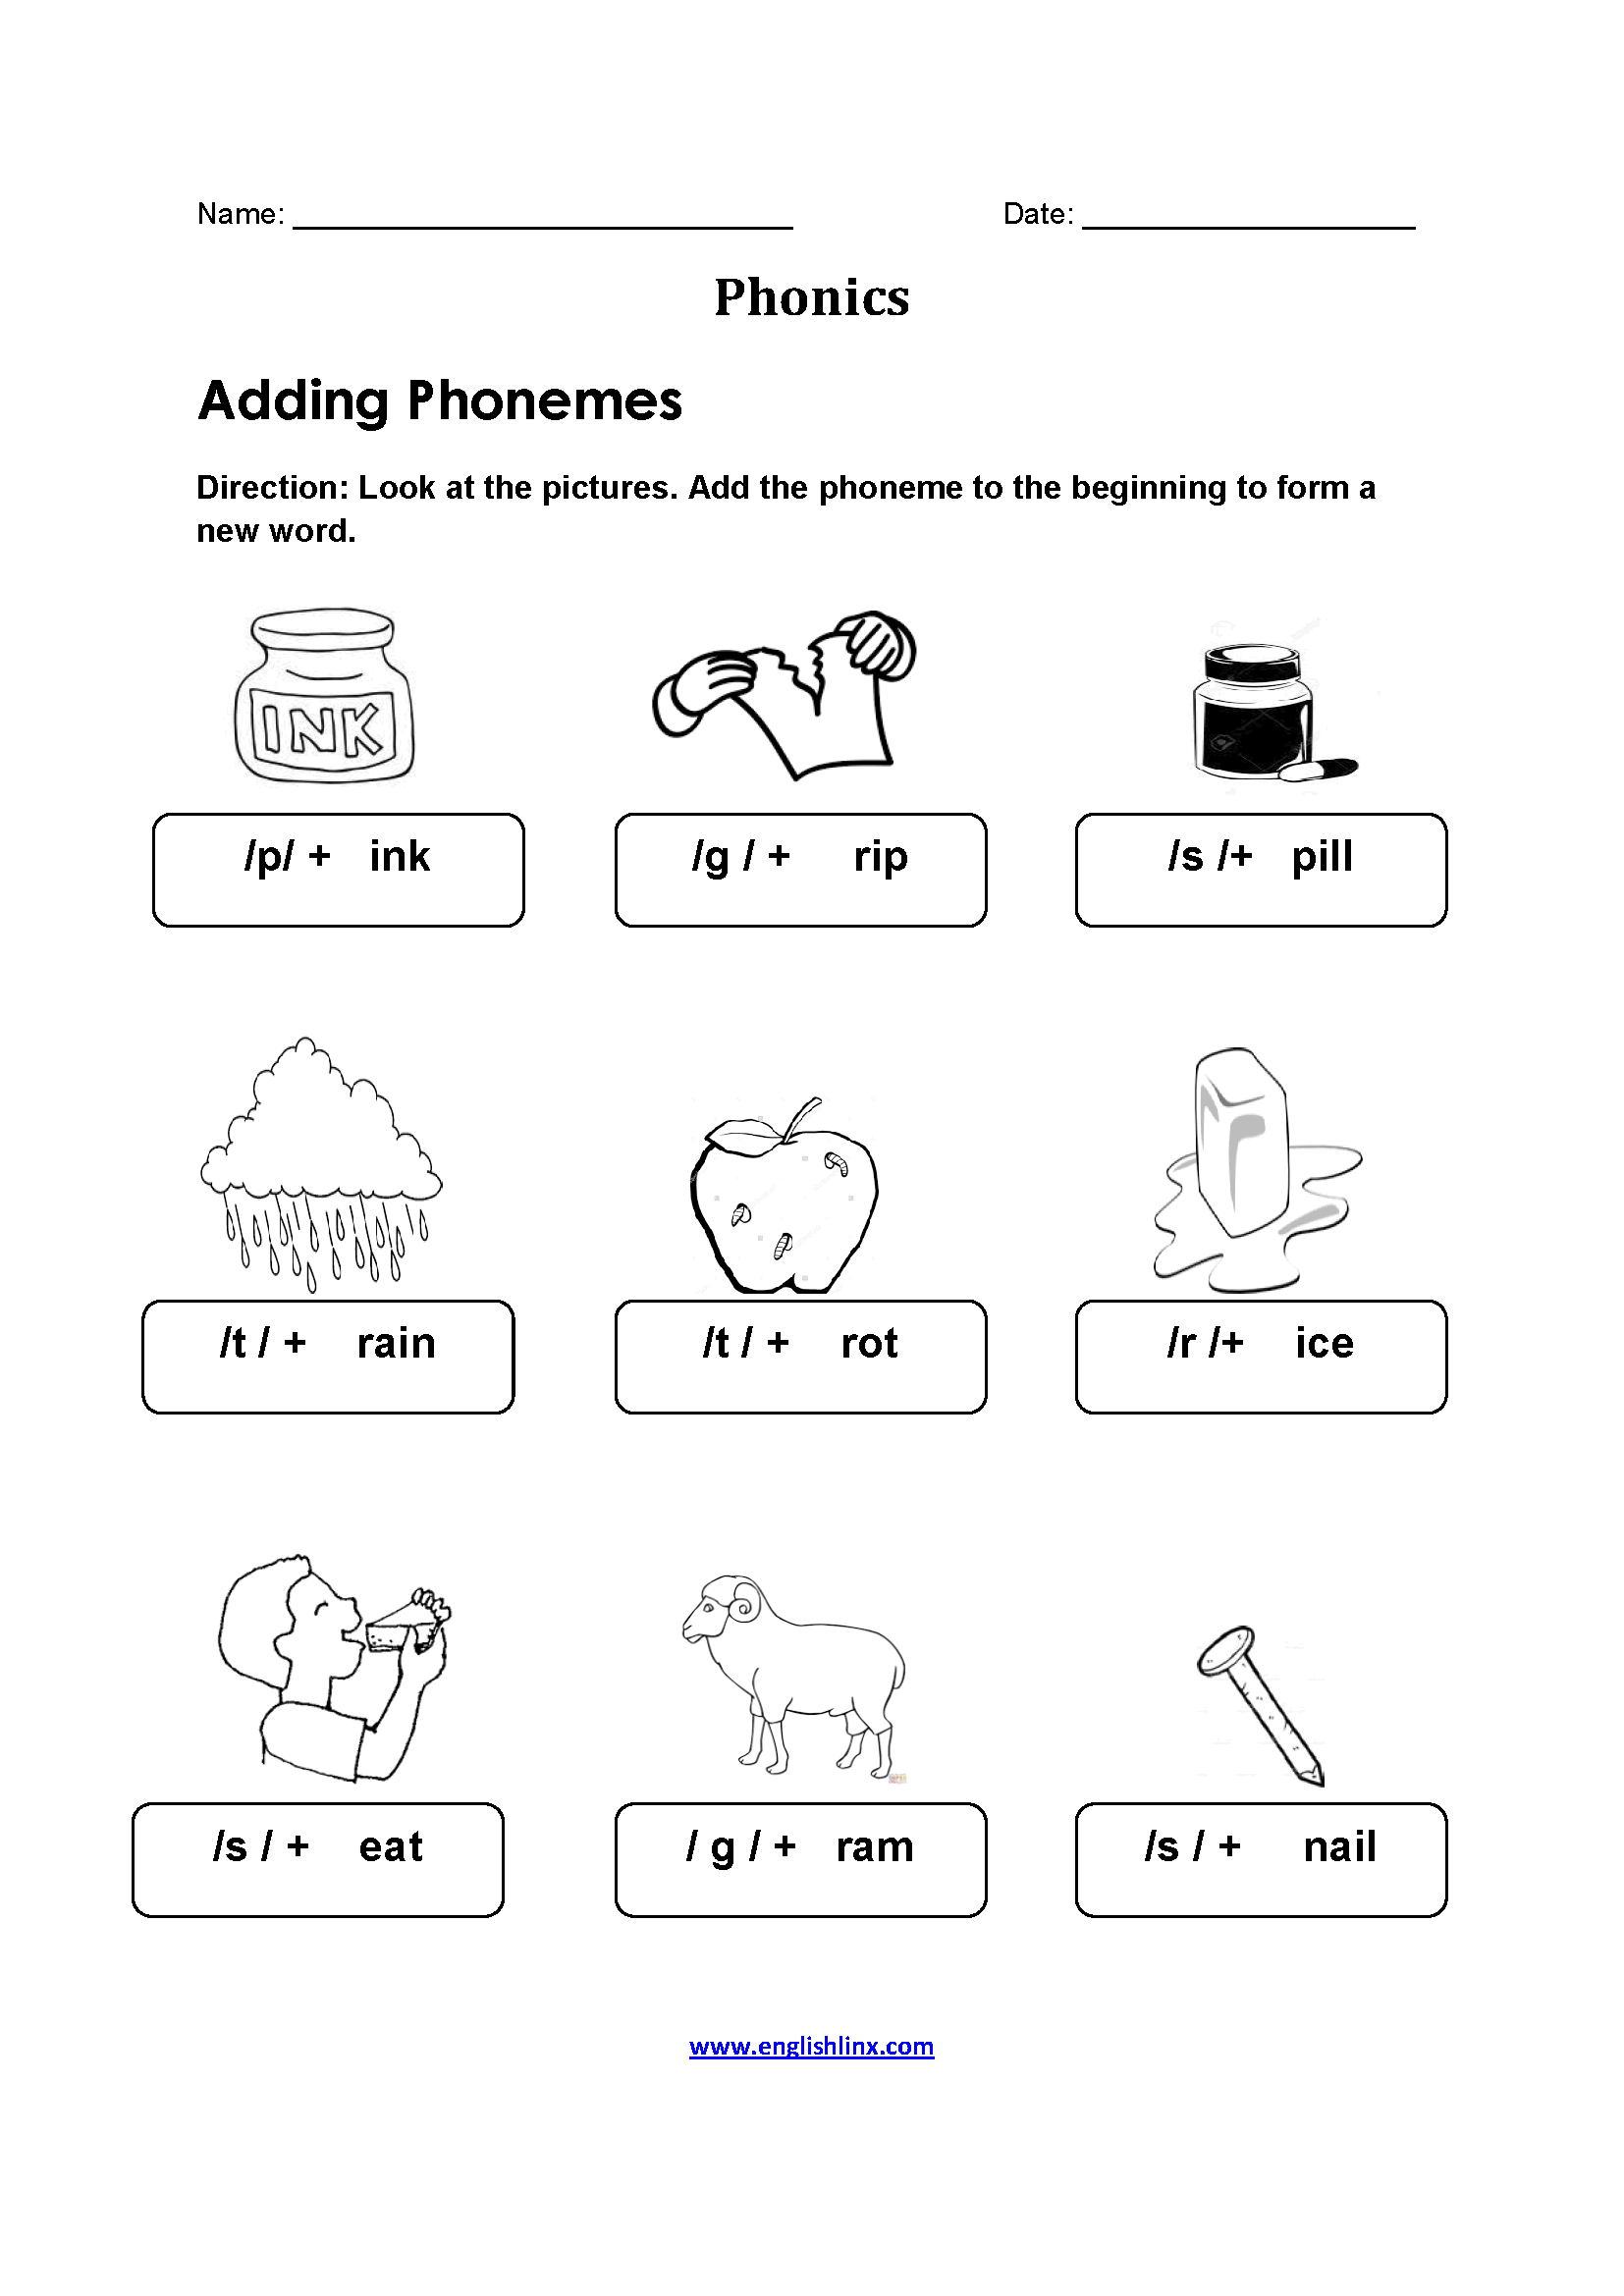 Adding Phonemes Pictures Phonics Worksheets